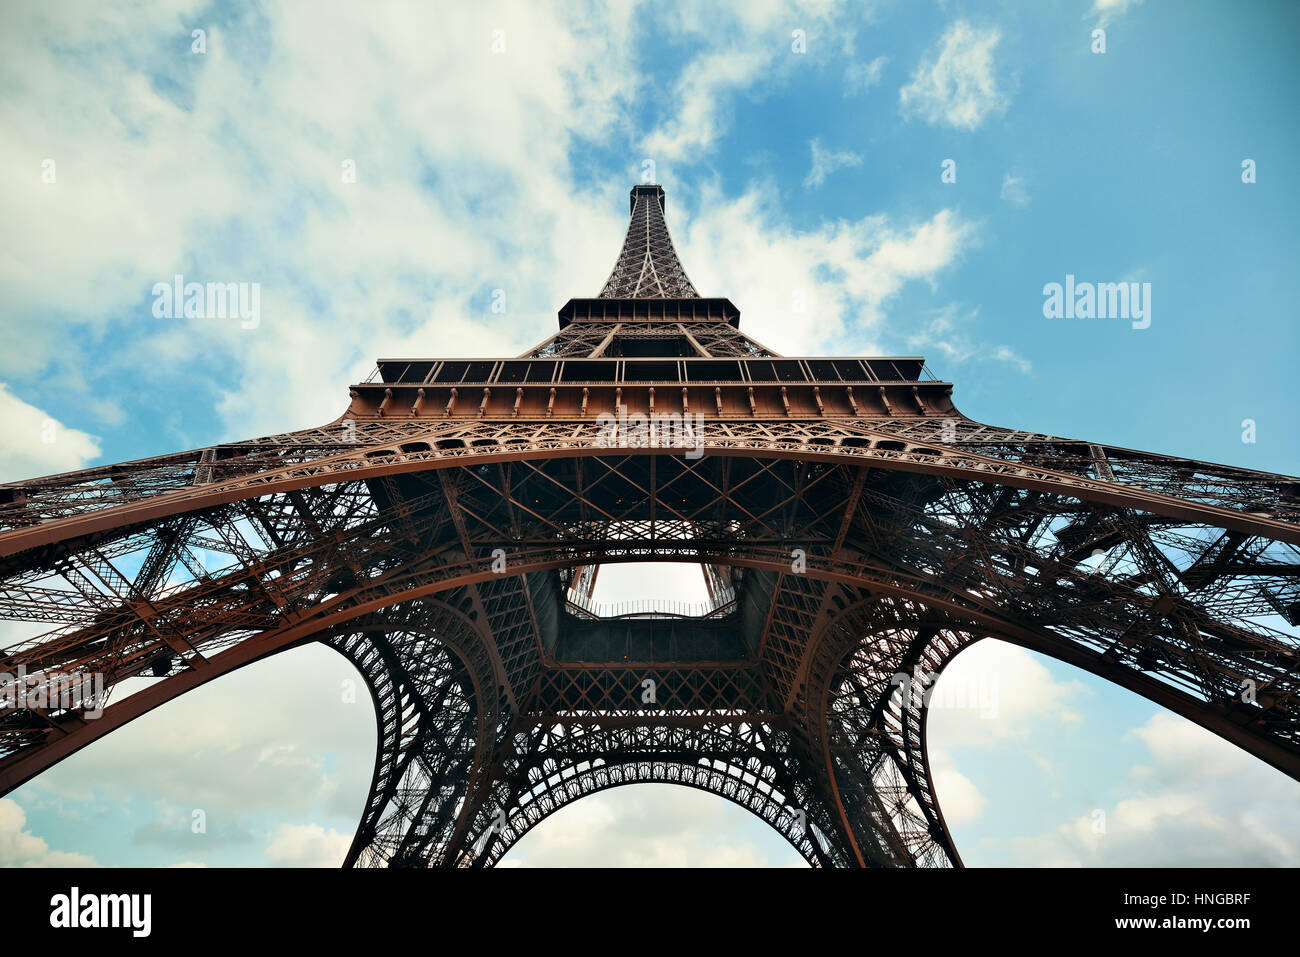 Eiffel Tower as the famous landmark in Paris, France. Stock Photo